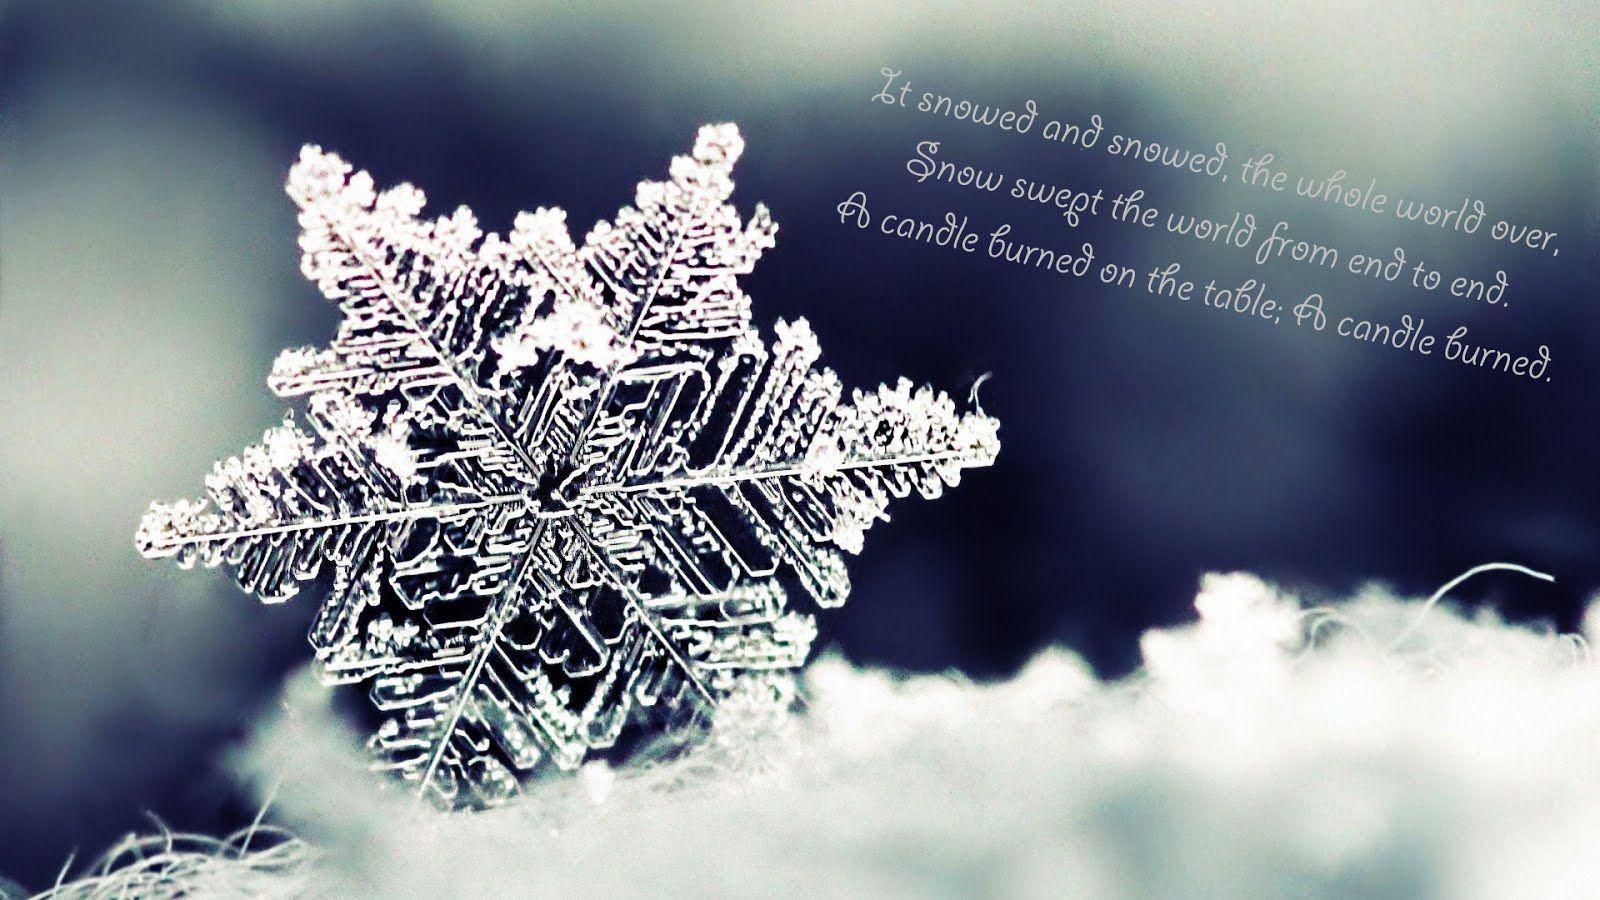 I Love Cold Weather Quotes Image & Picture